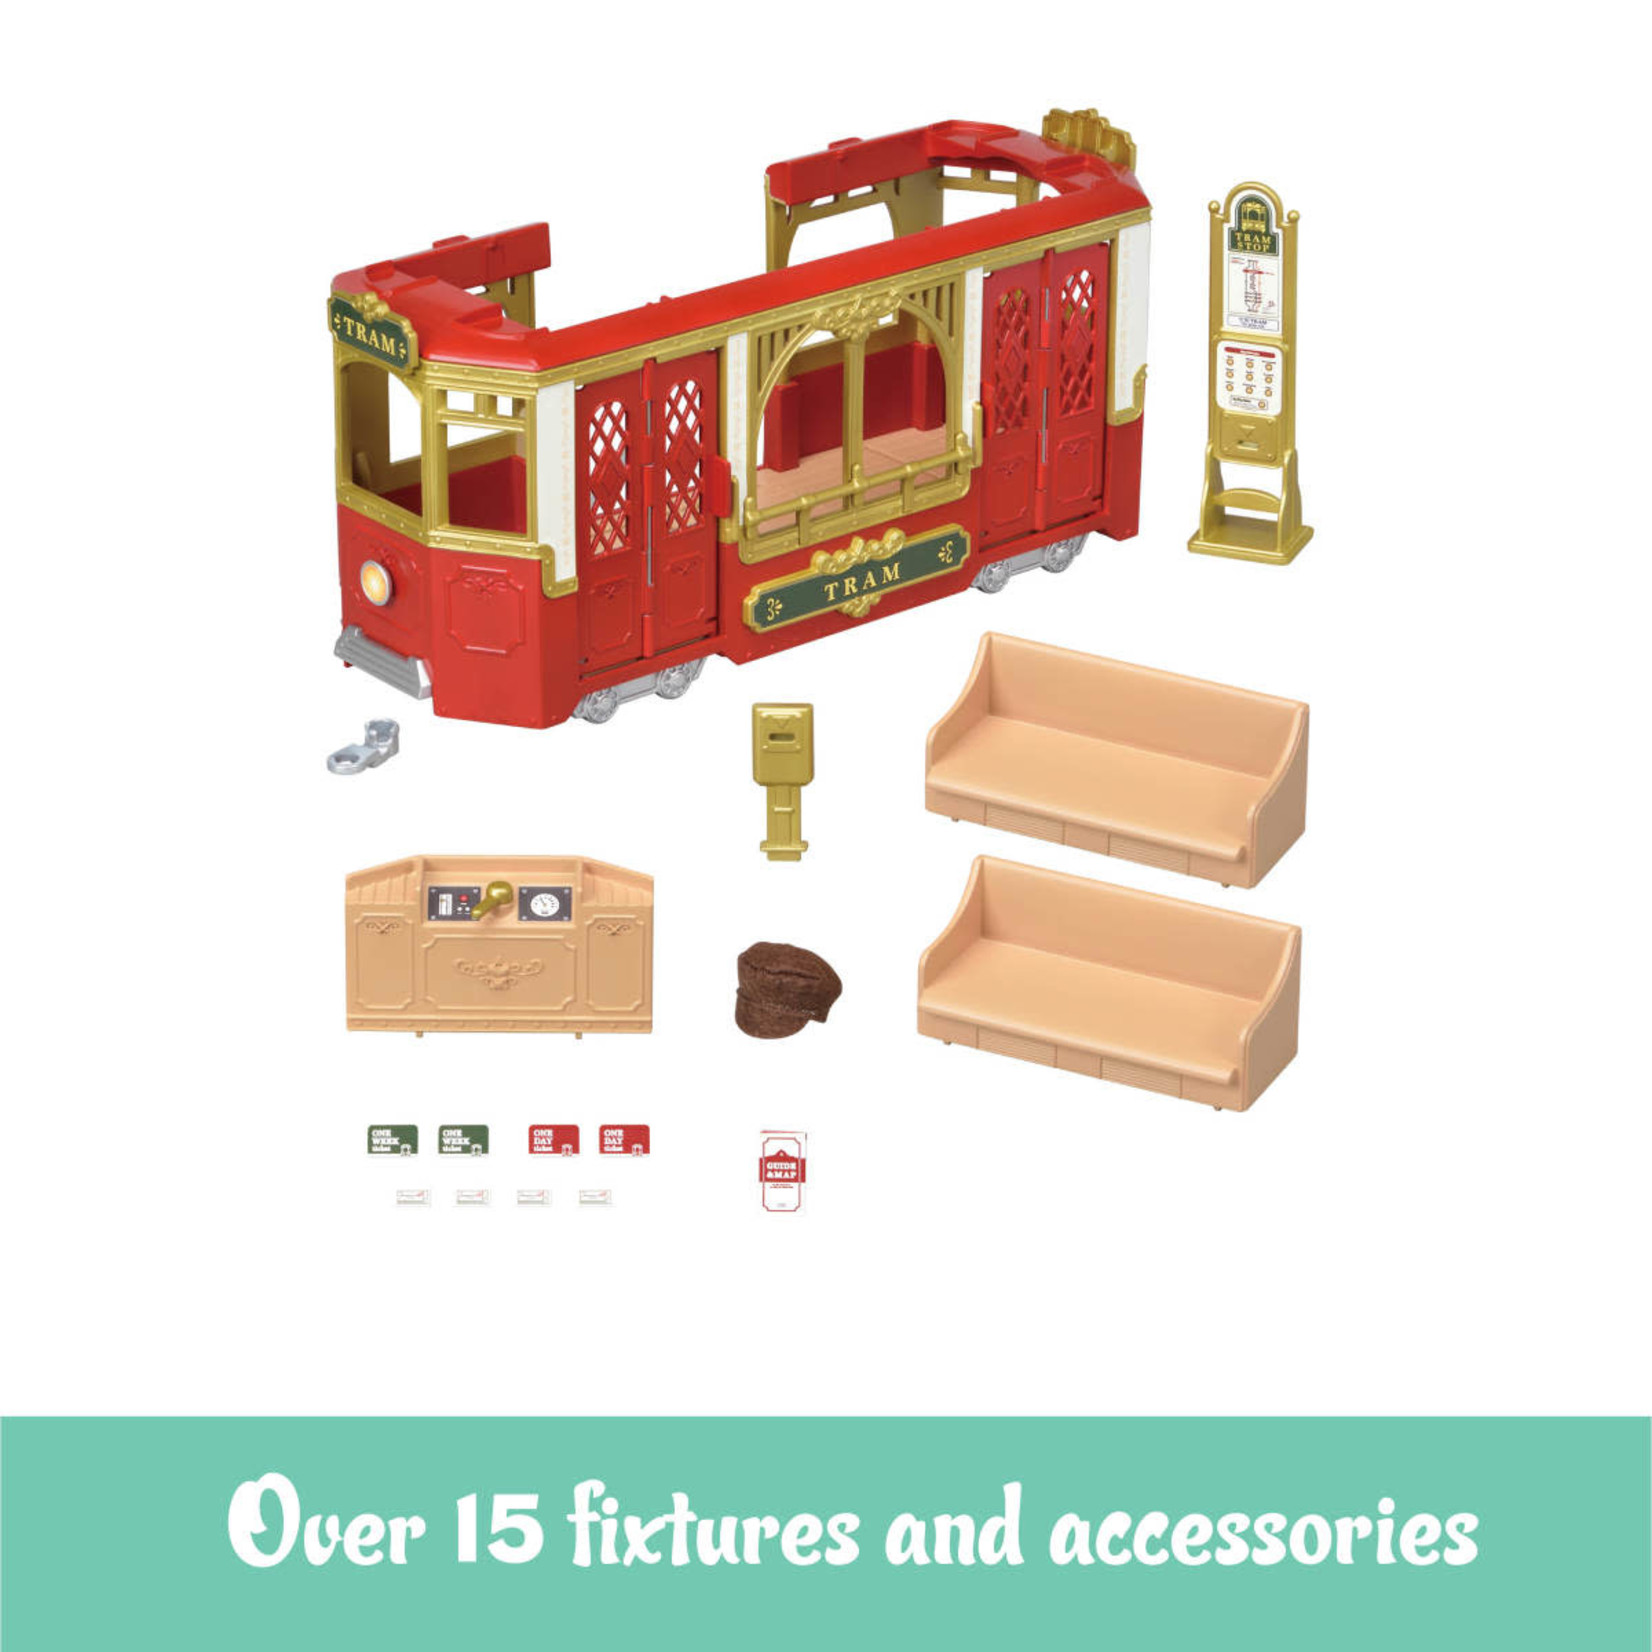 Calico Critters Calico Critters Ride Along Tram Set